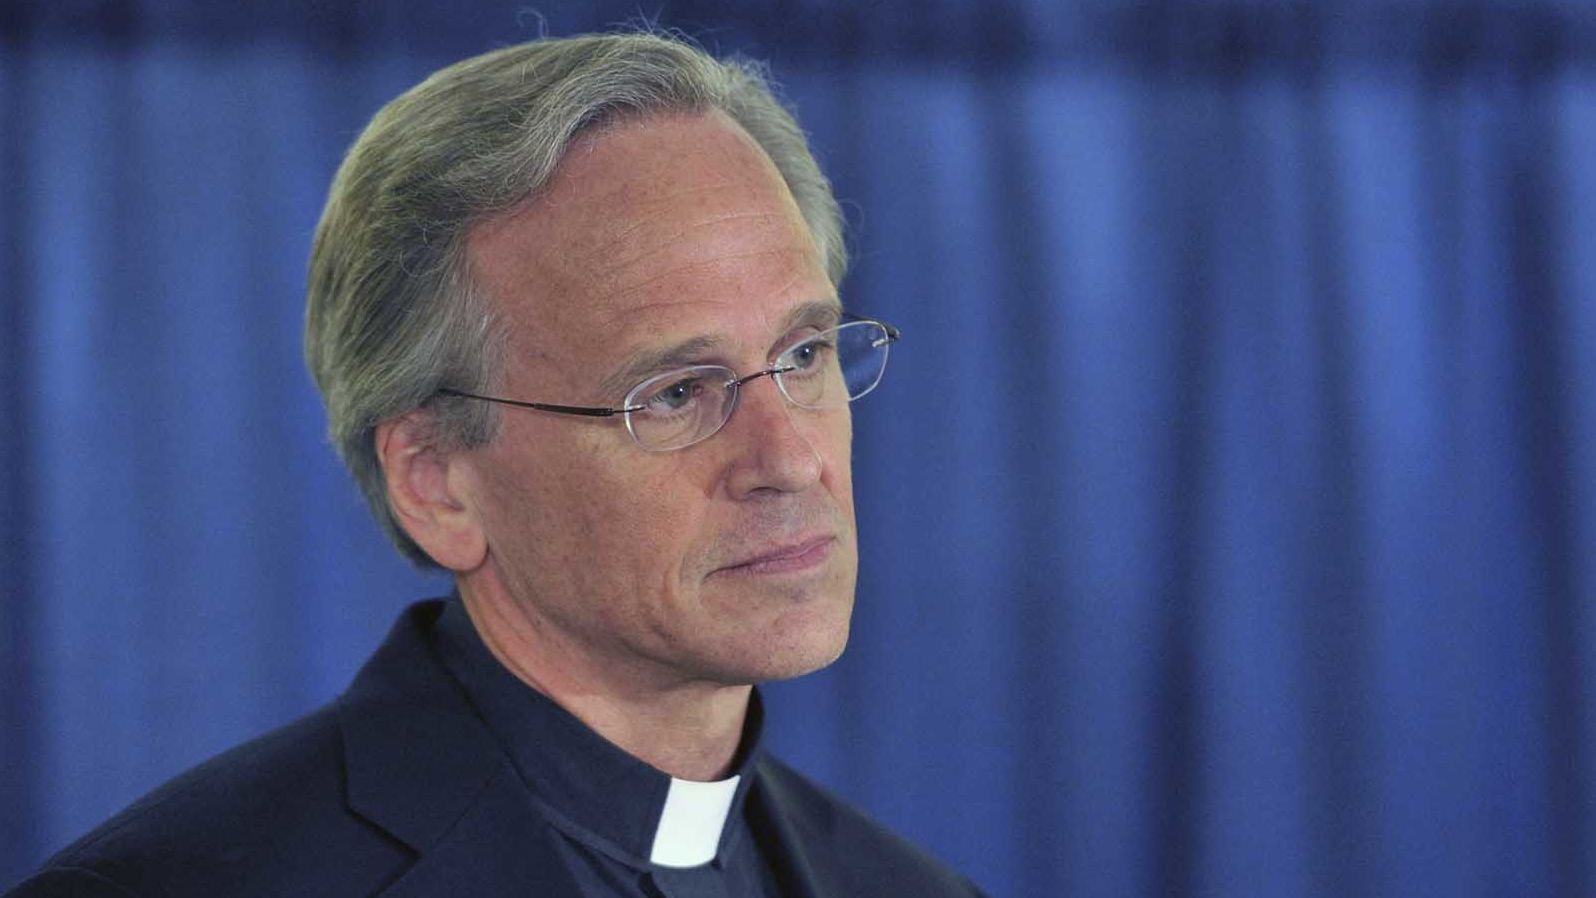 University of Notre Dame President Rev. John I. Jenkins is facing a student petition pushing for him to resign.